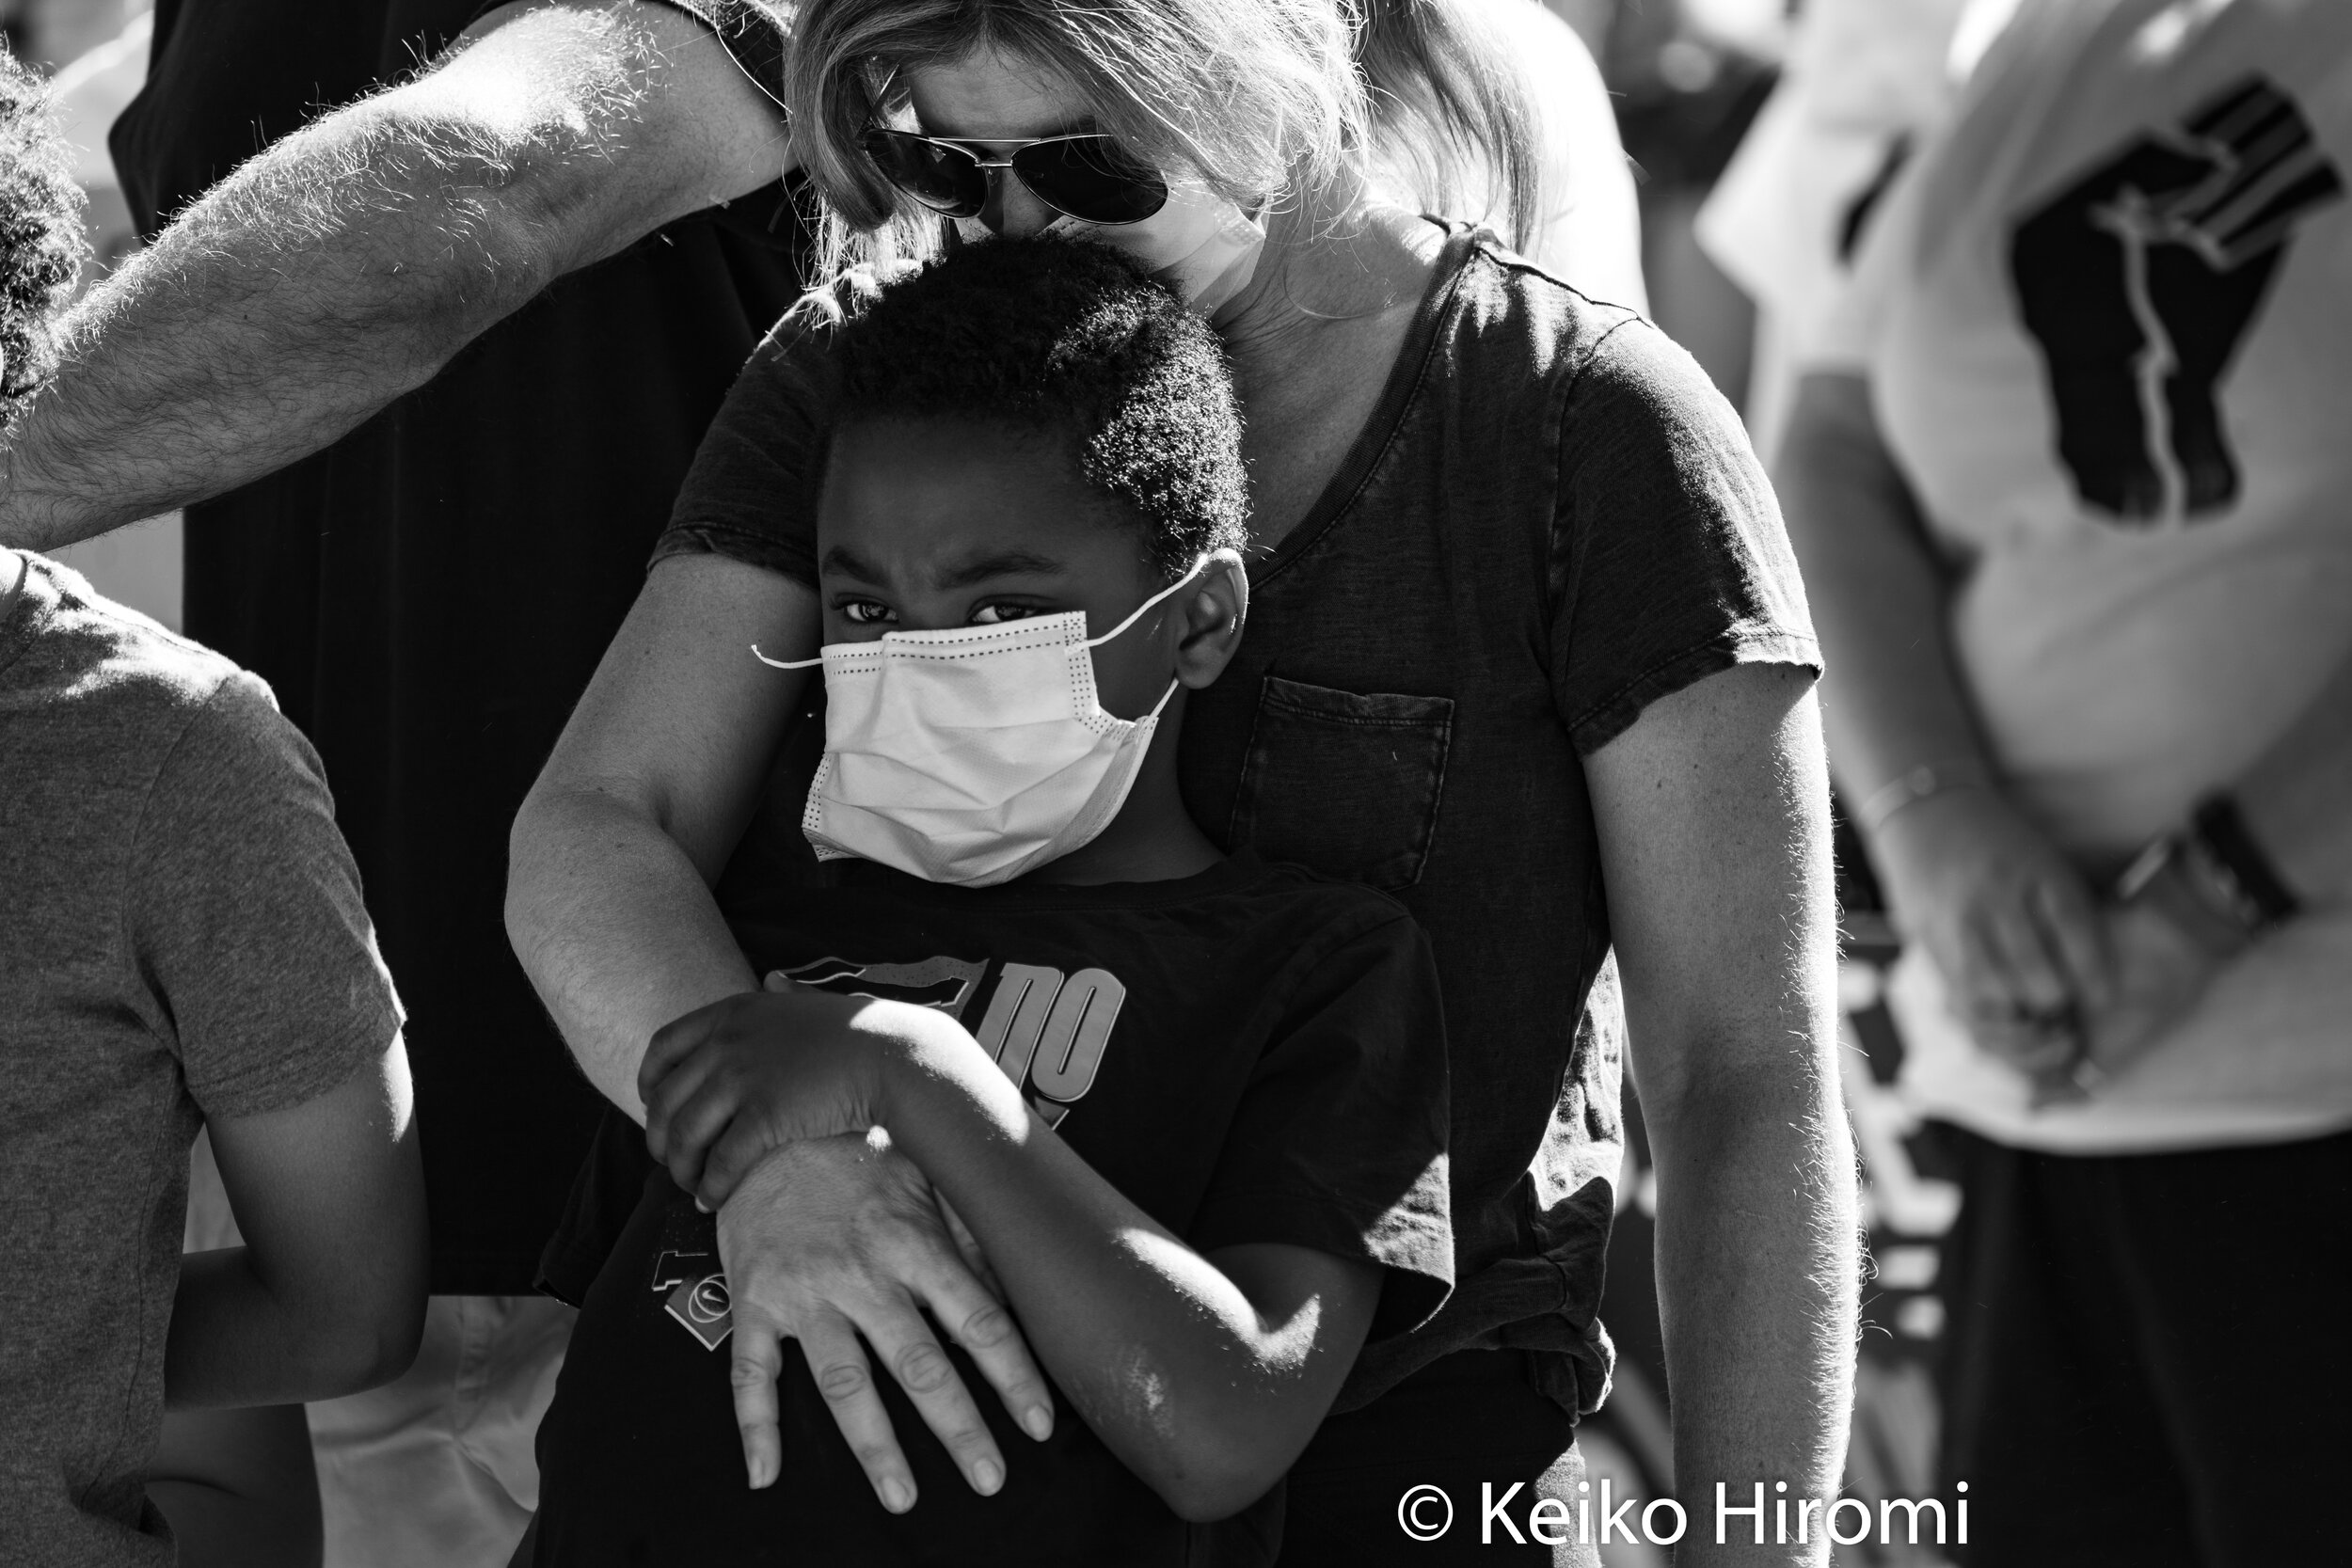  June 8, 2020, Lynnfield, Massachusetts, USA: A young protester listening to an activist during a rally in response to deaths of George Floyd and against police brutality and racism in Lynnfield. 